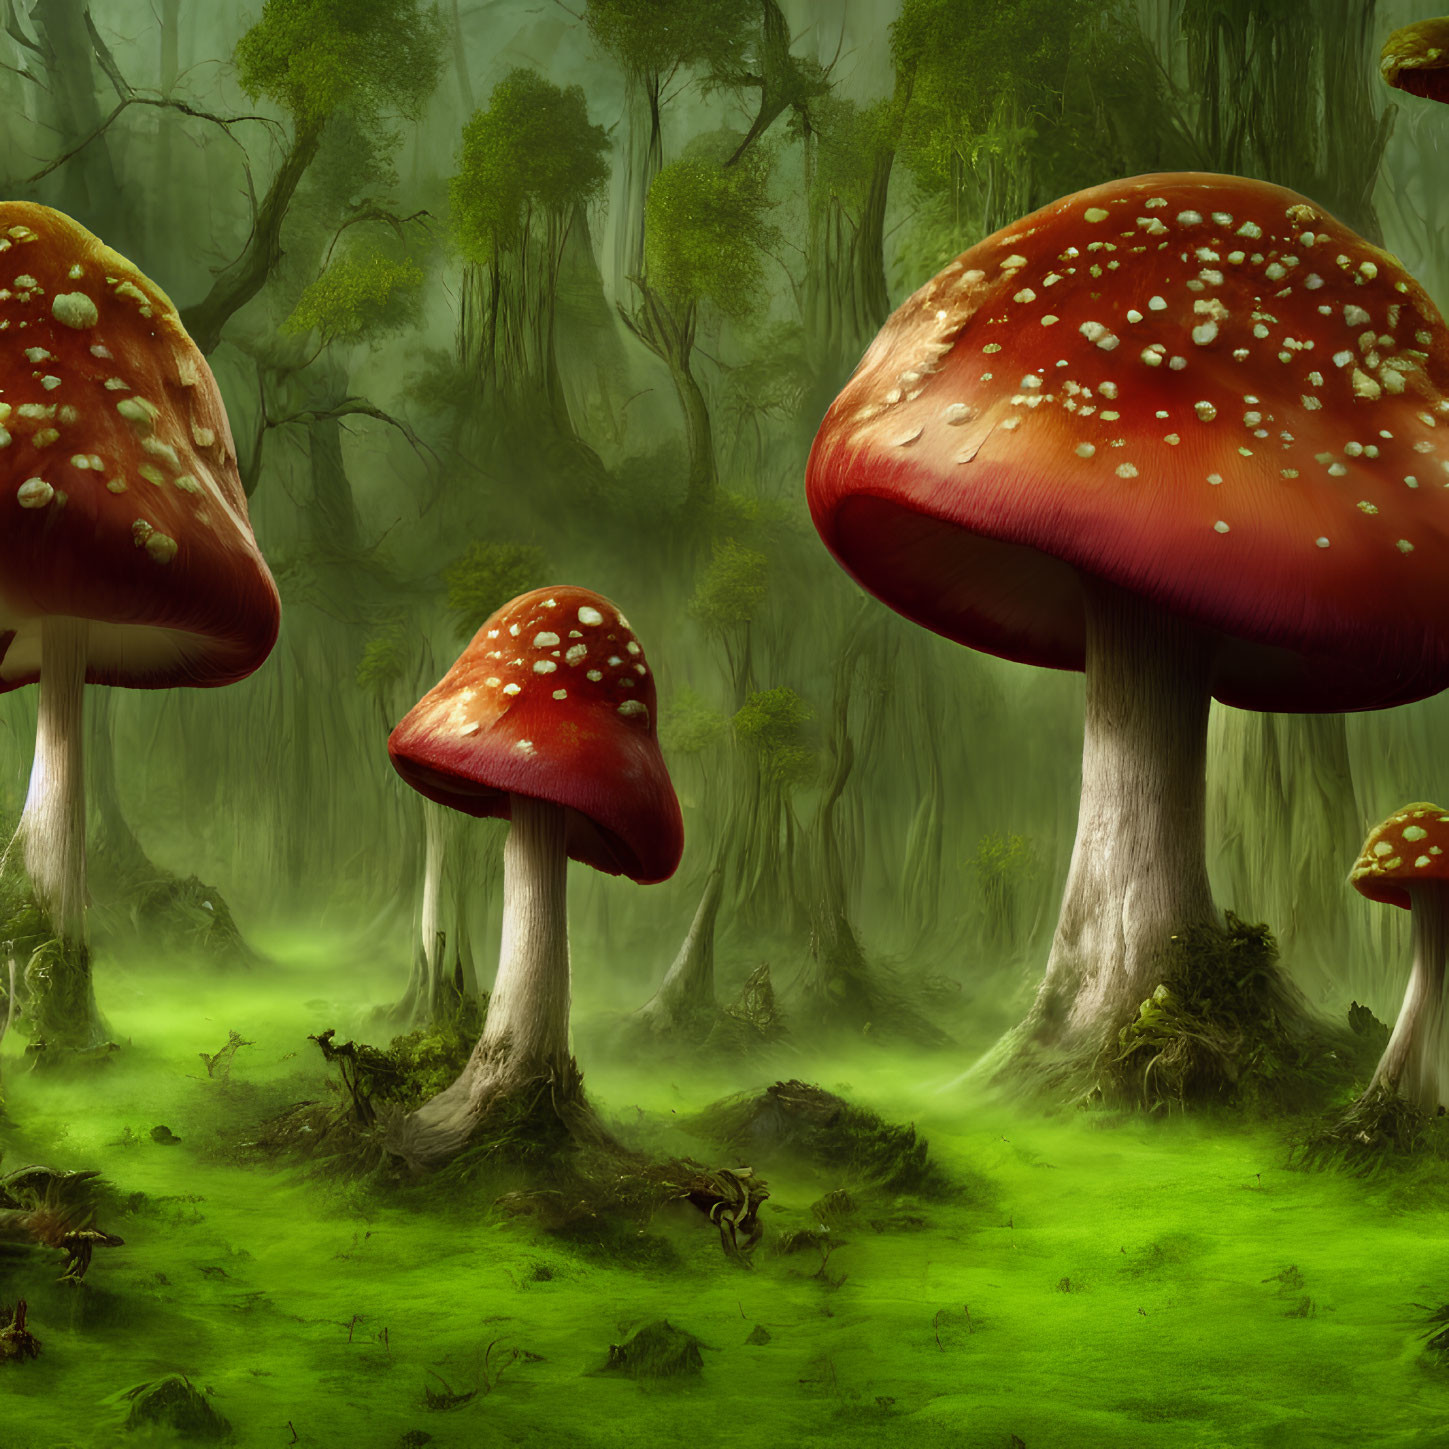 Enchanted forest with oversized red-capped mushrooms and twisted trees